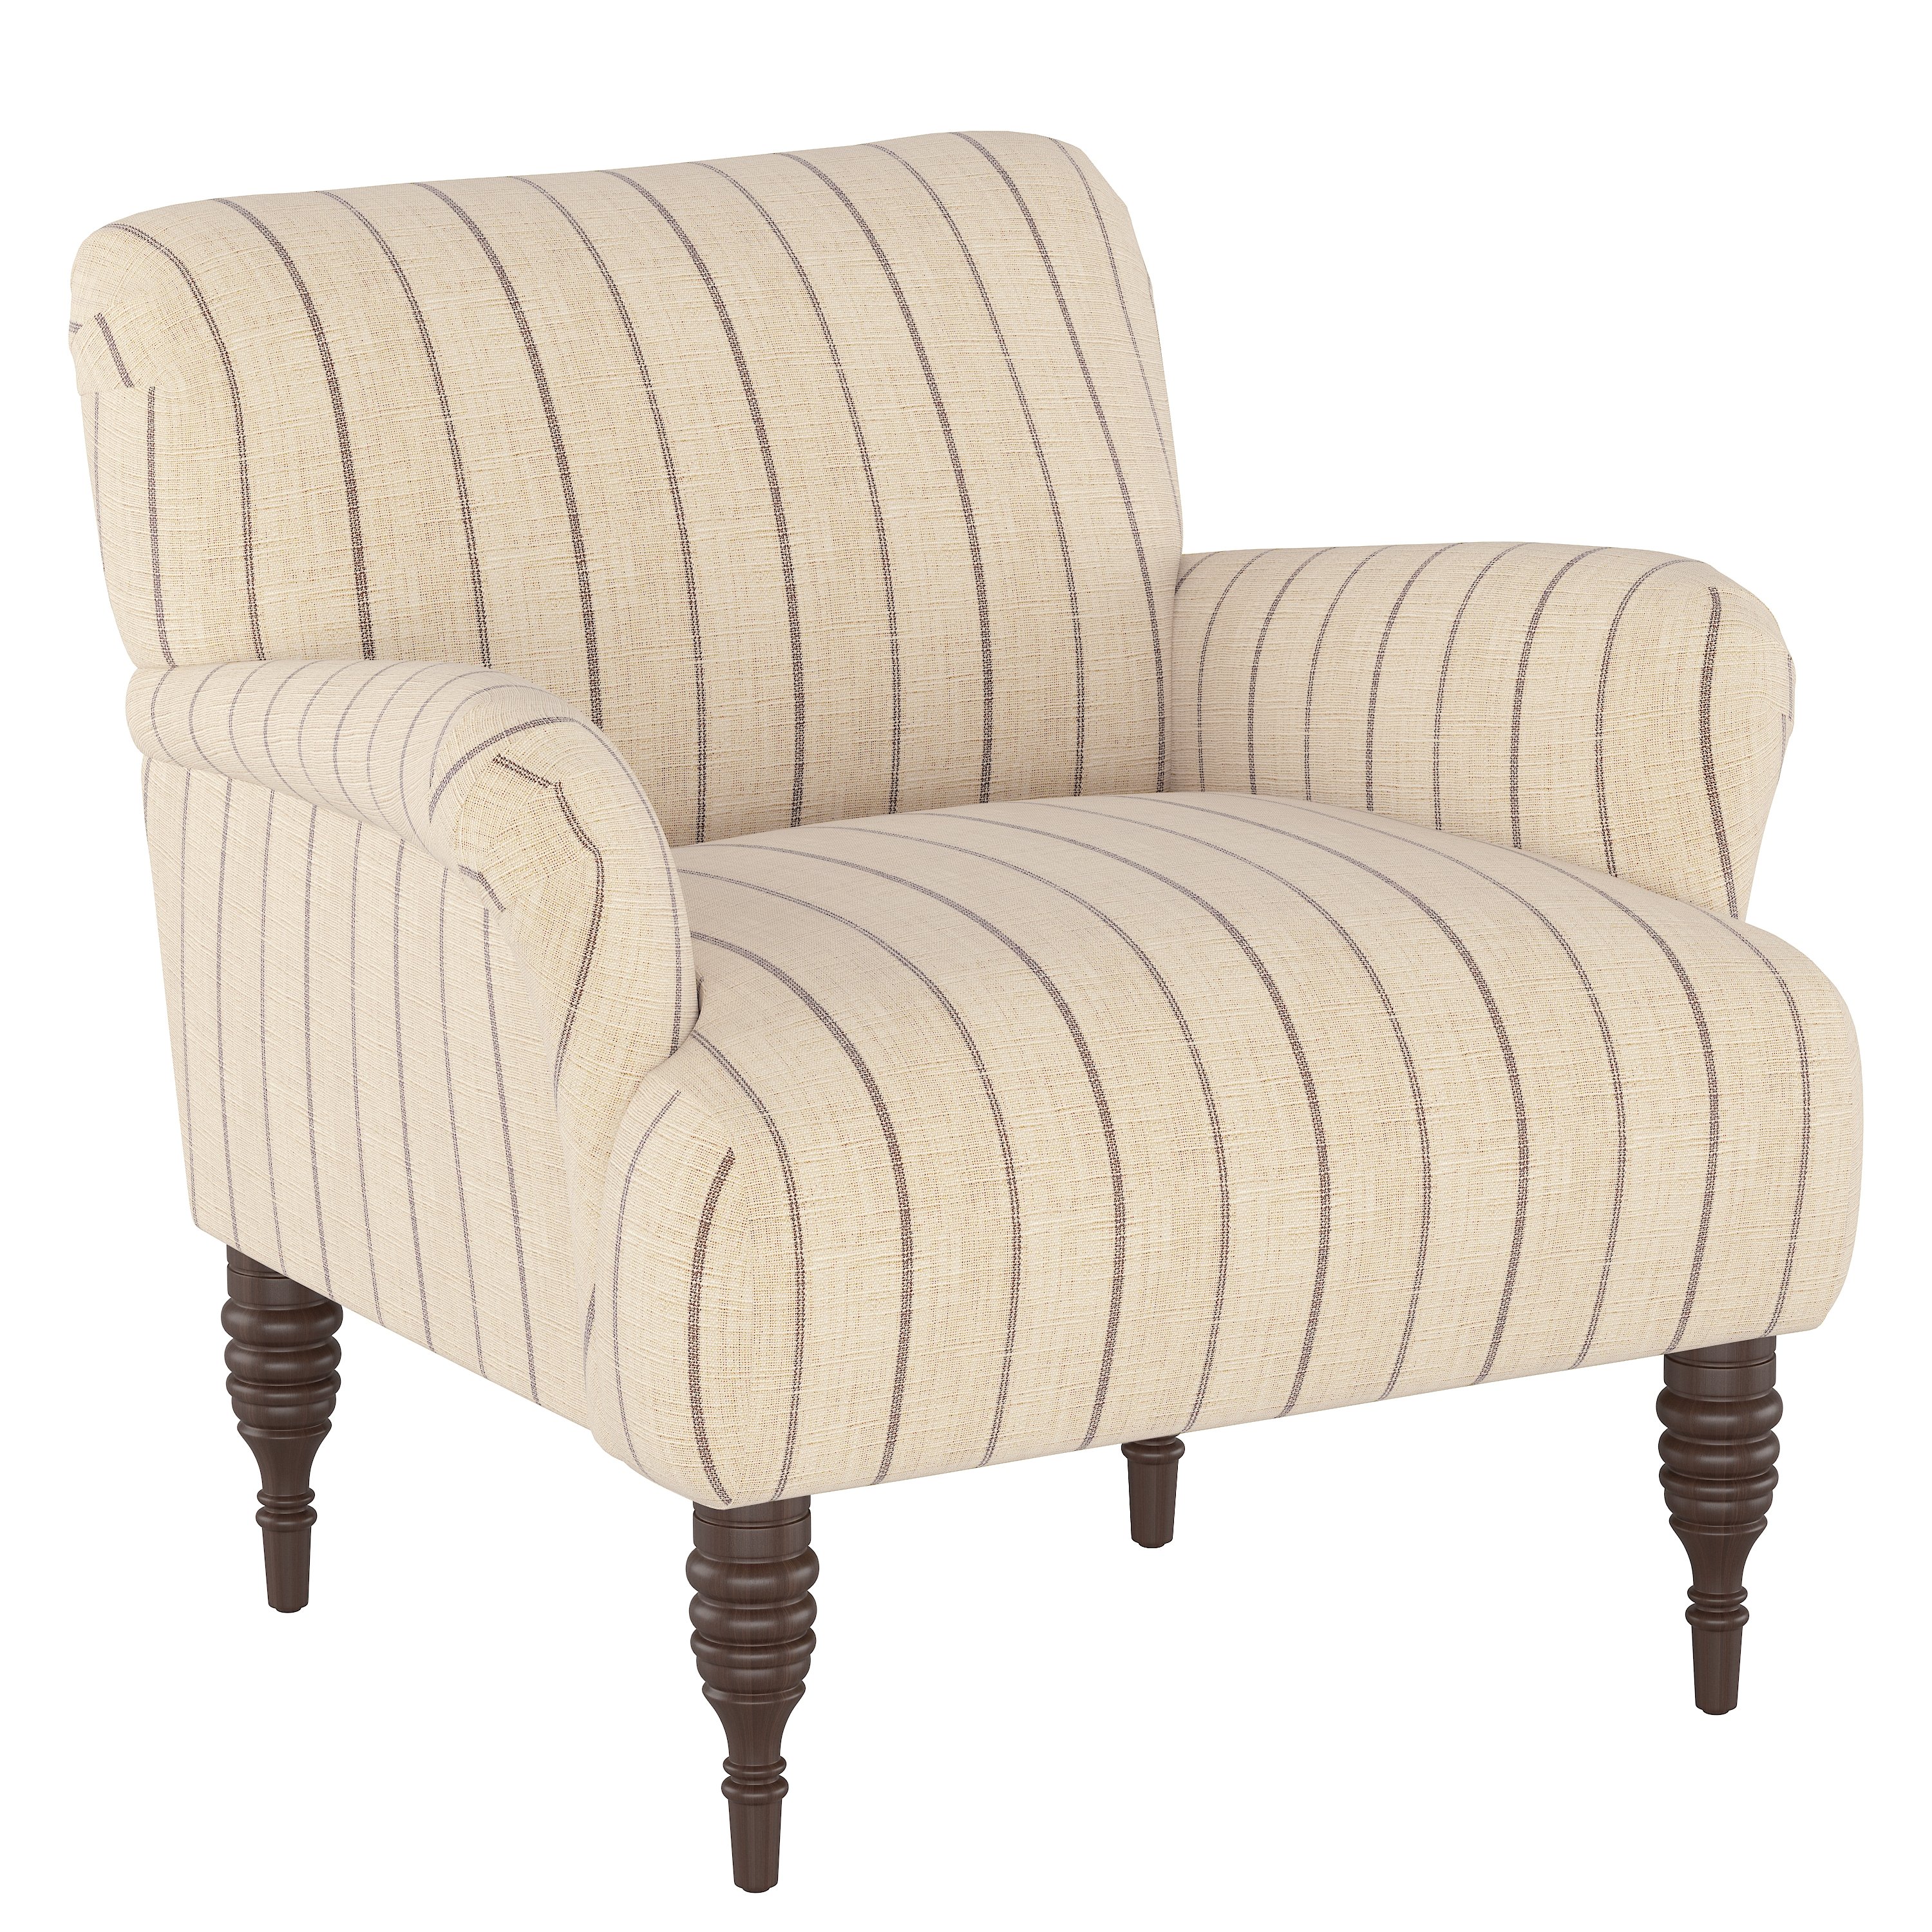 Vyolet Accent Chair - Image 1